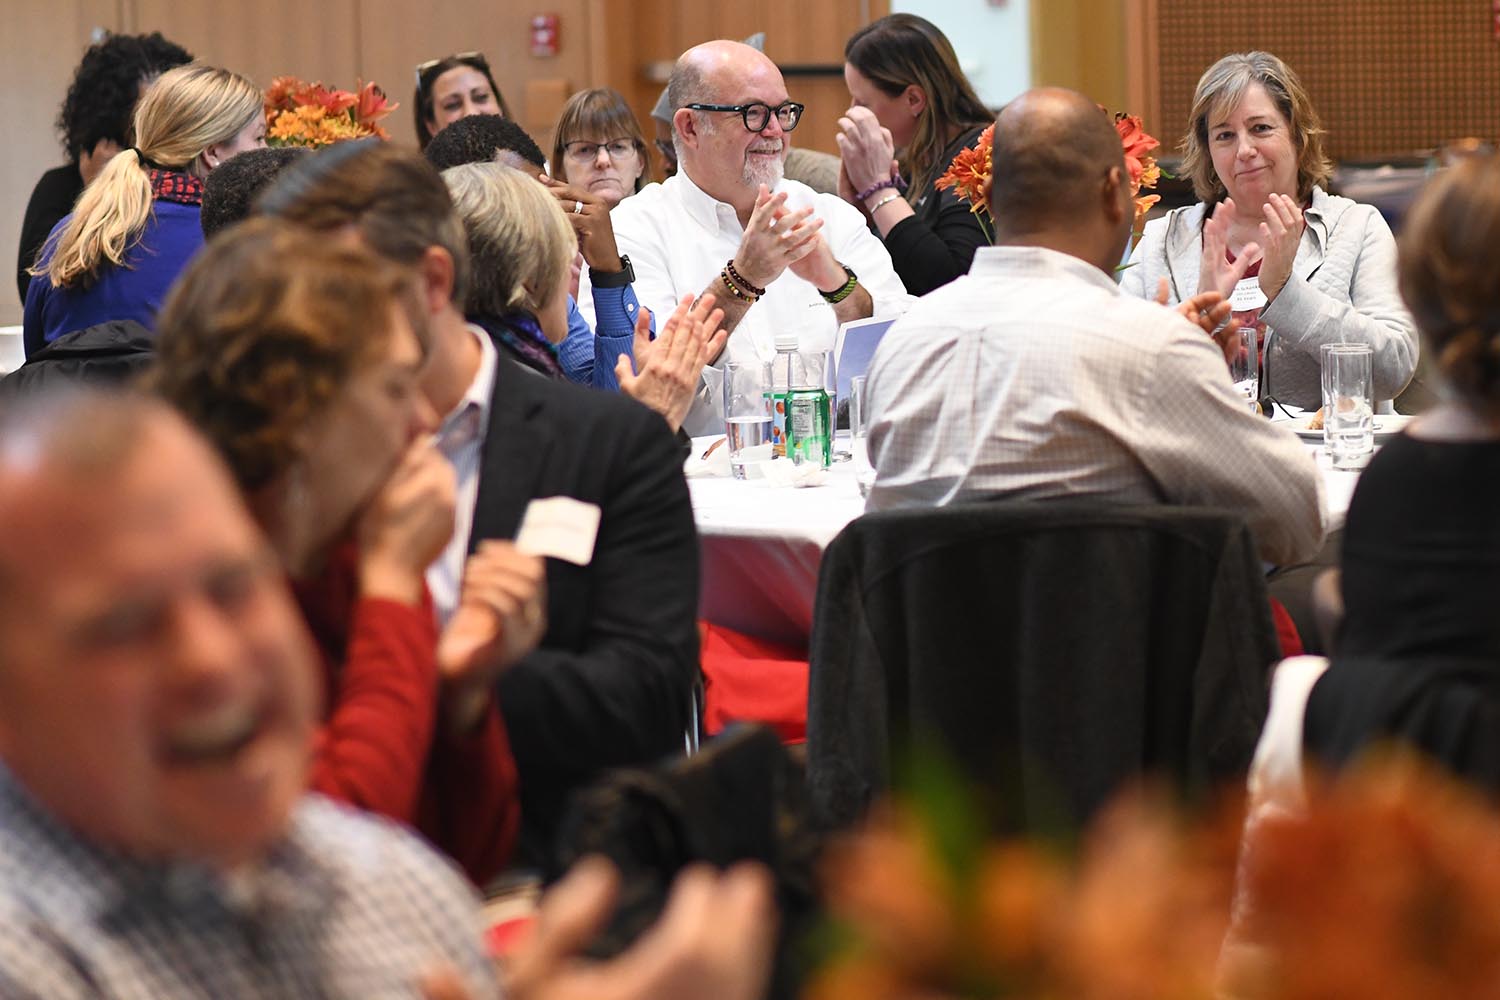 On Nov. 18, the Office of Human Resources hosted its annual Staff Recognition Luncheon in Beckham Hall. 